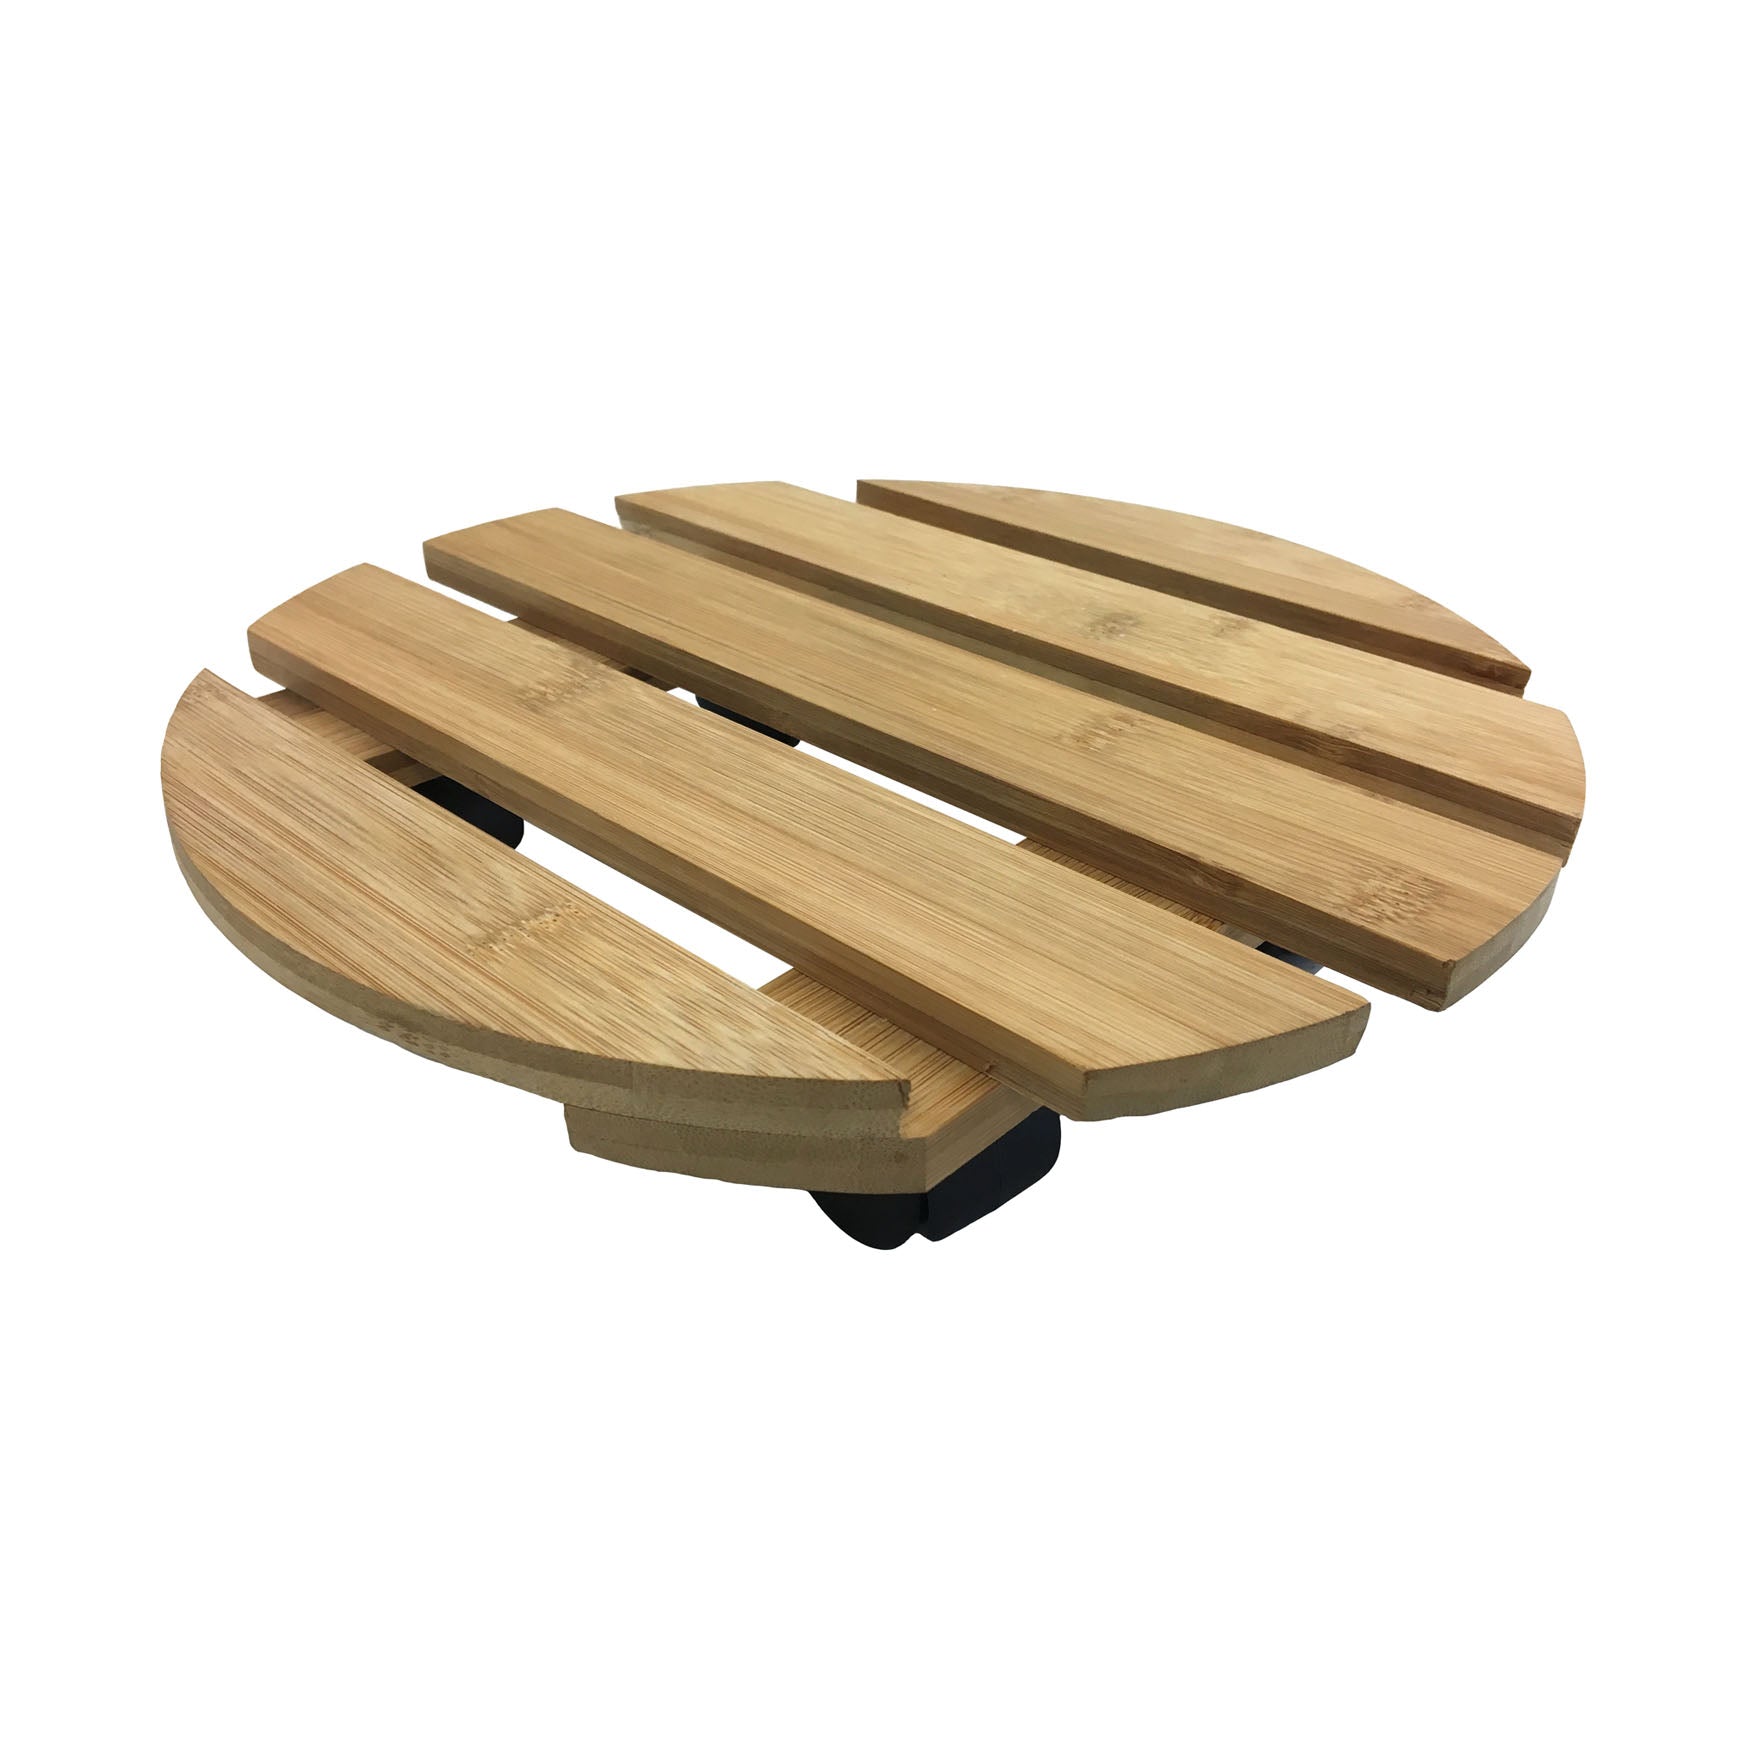 Round Bamboo Plant Caddy.  220 lbs. capacity. 11.4"D x 2.75"H, 1.4 lbs.